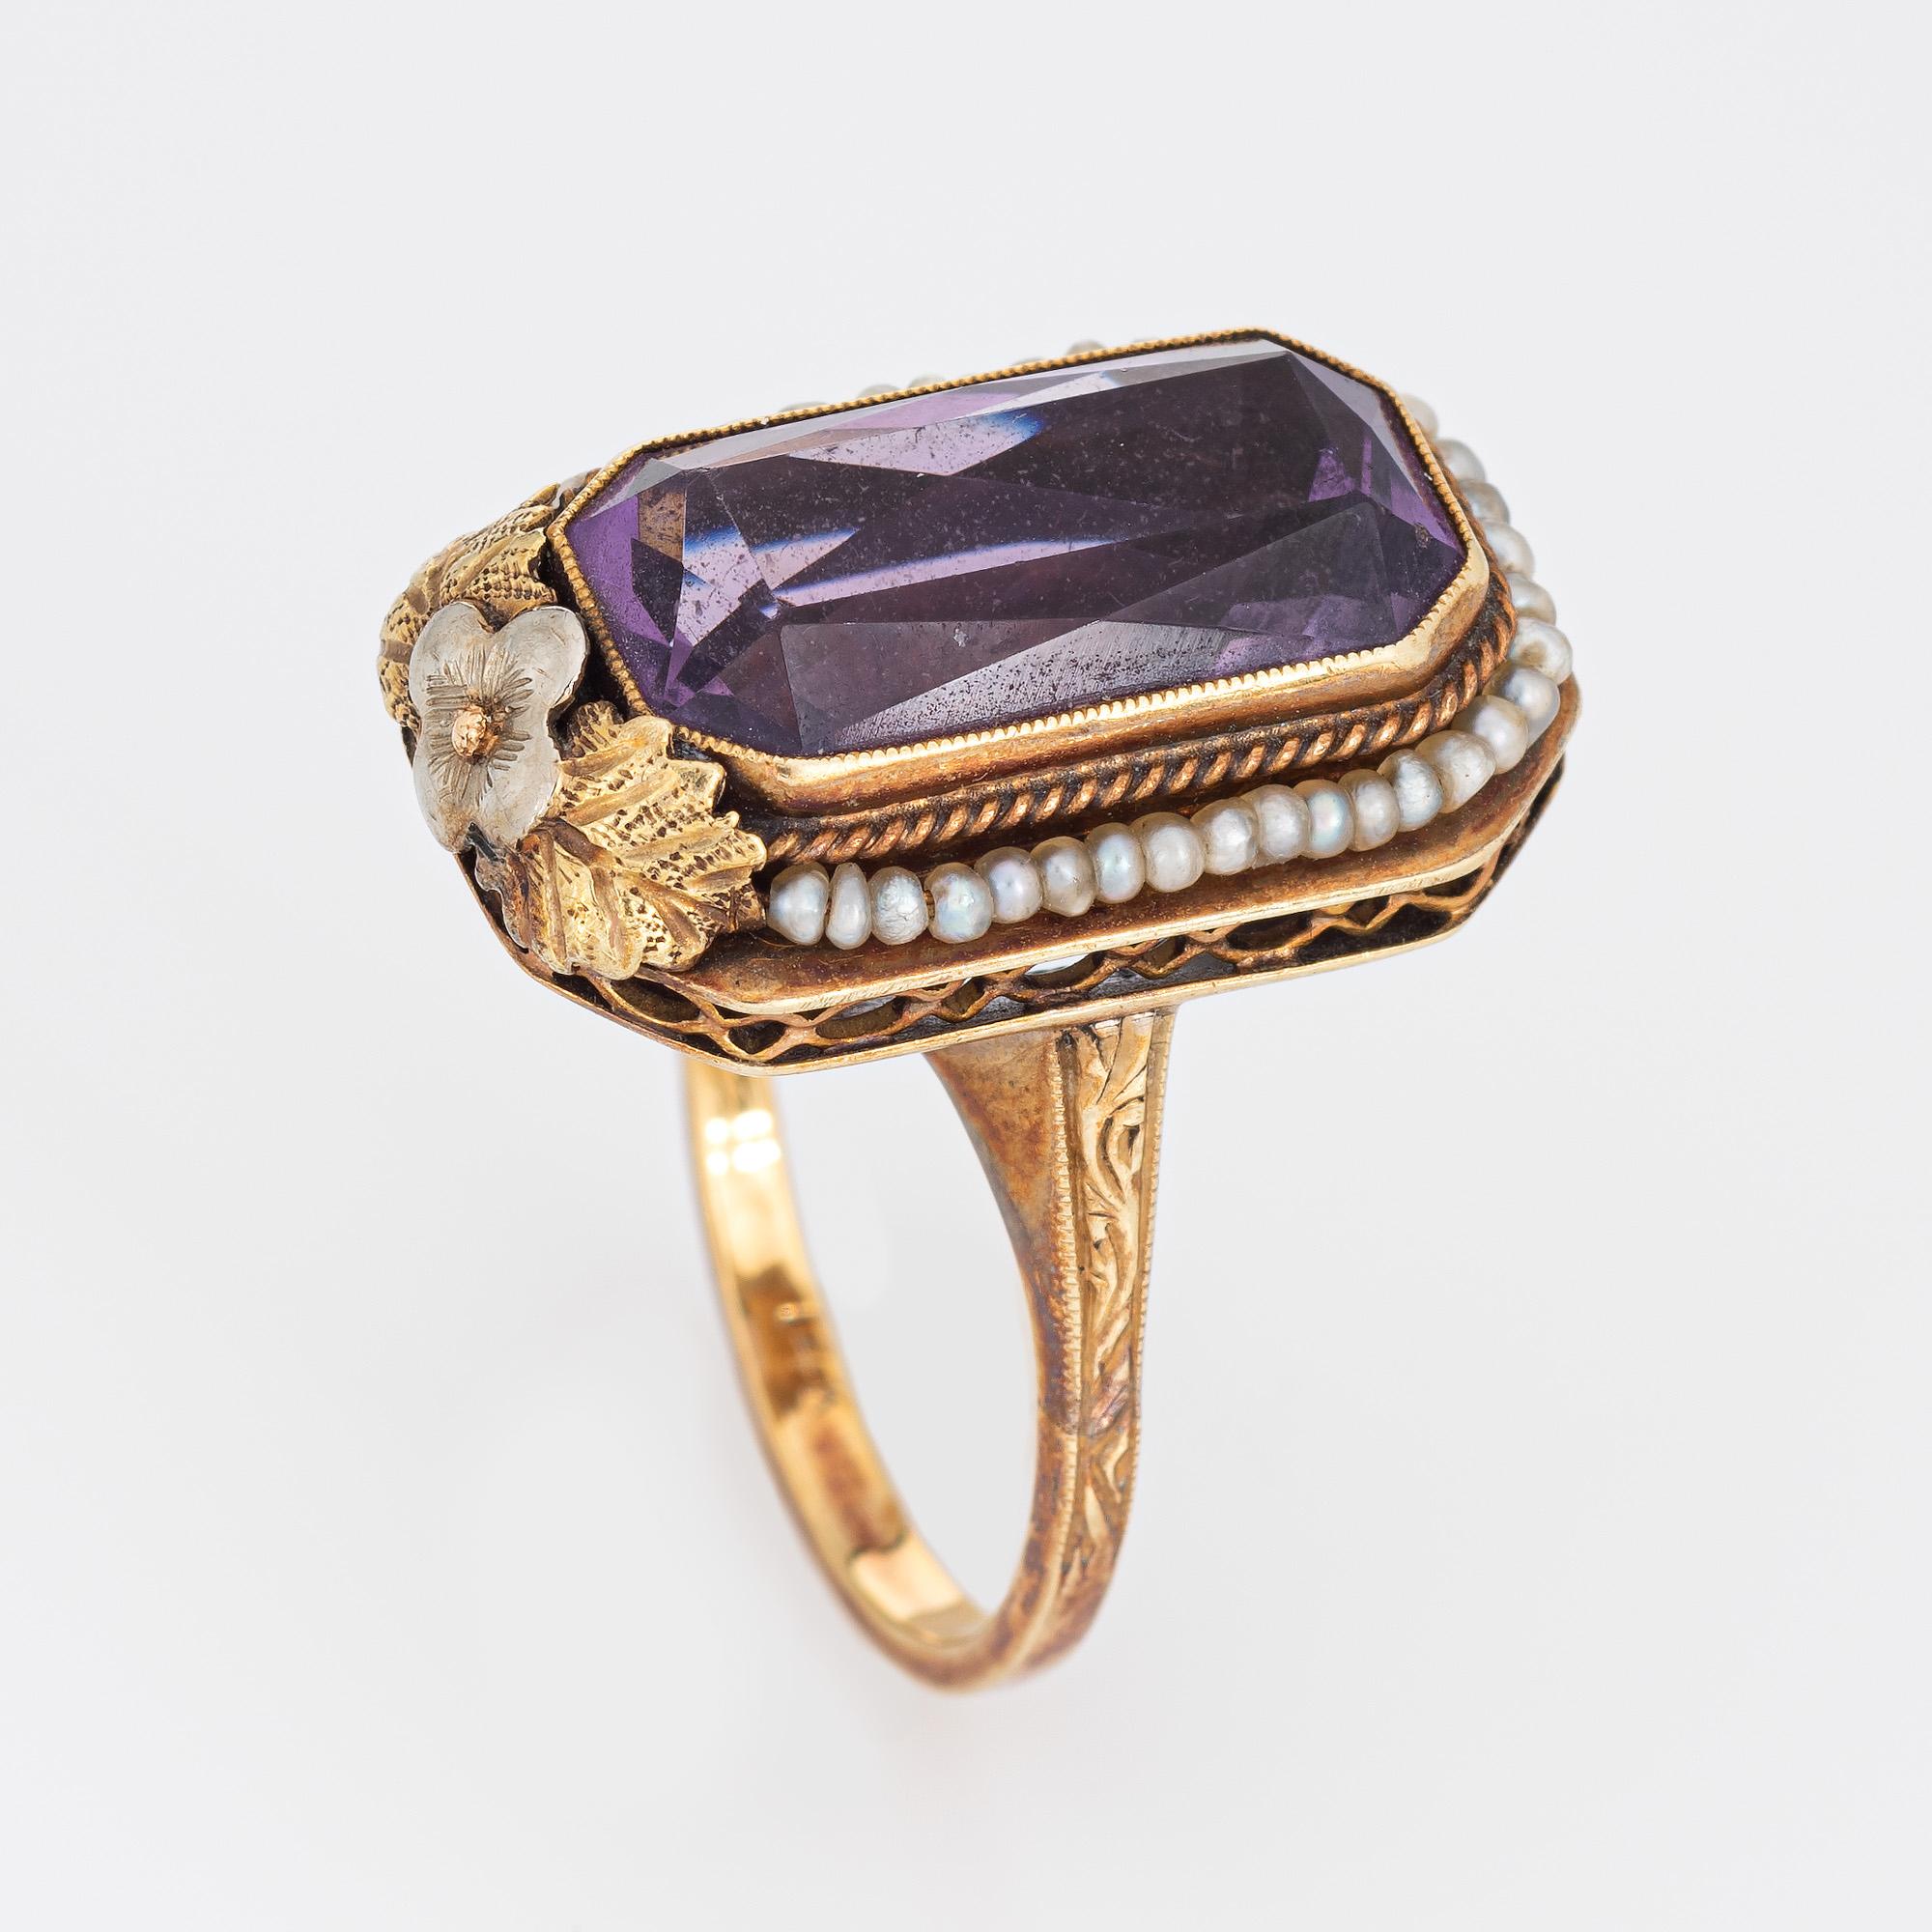 Finely detailed vintage Art Deco amethyst & seed pearl ring (circa 1920s to 1930s) crafted in 14k yellow gold. 

Amethyst measures 16mm x 8mm (estimated at 6 carats). Note: few light surface abrasions to the amethyst. The seed pearls are approx. 1mm